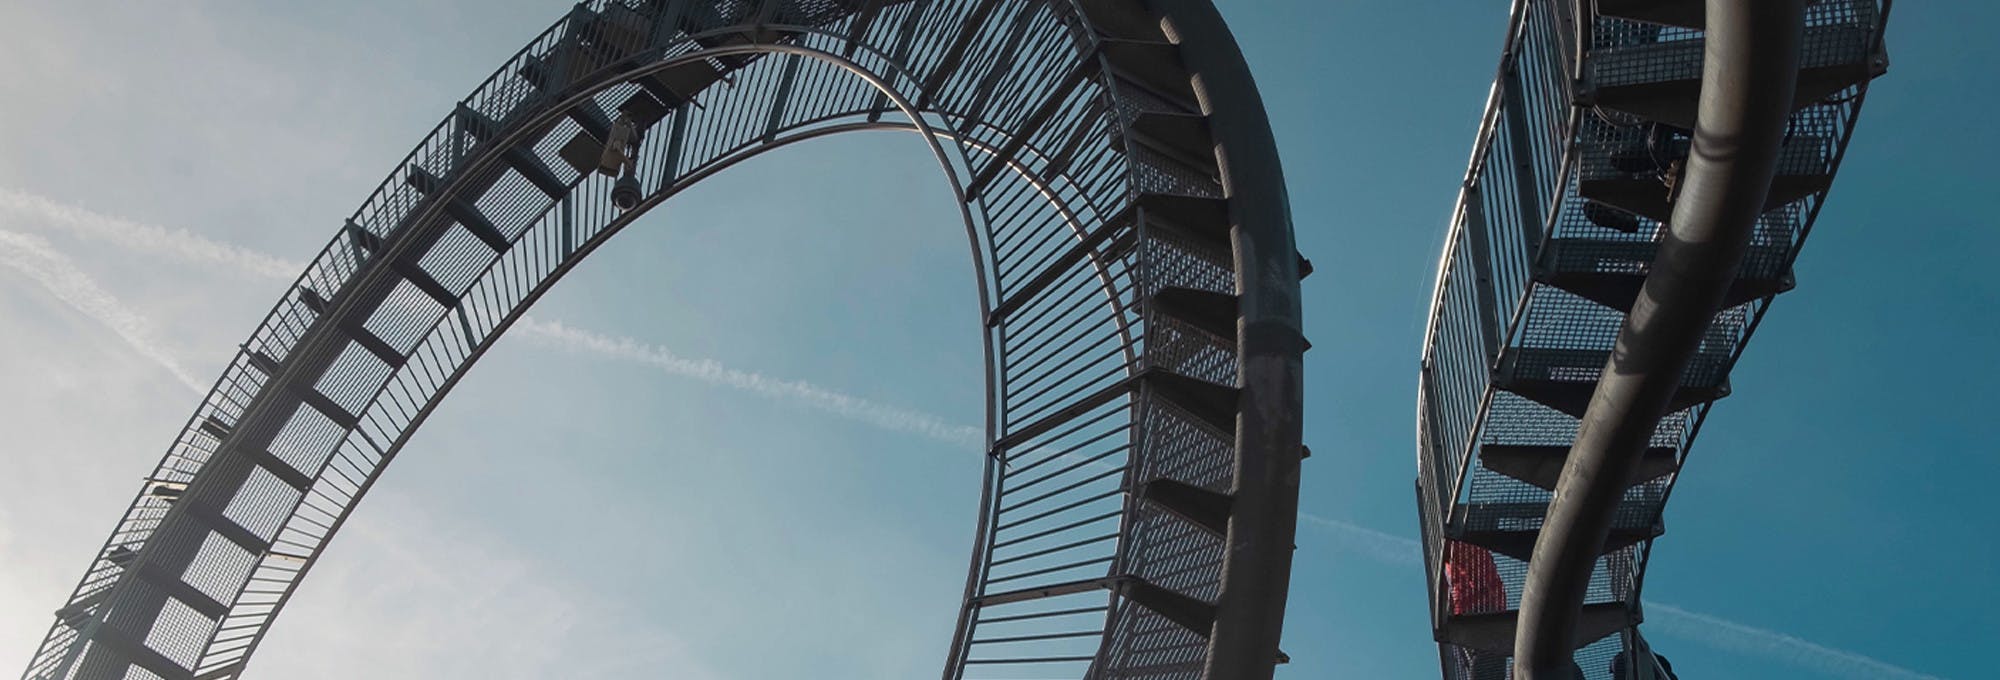 Rollercoaster curving through the sky HIGH RES